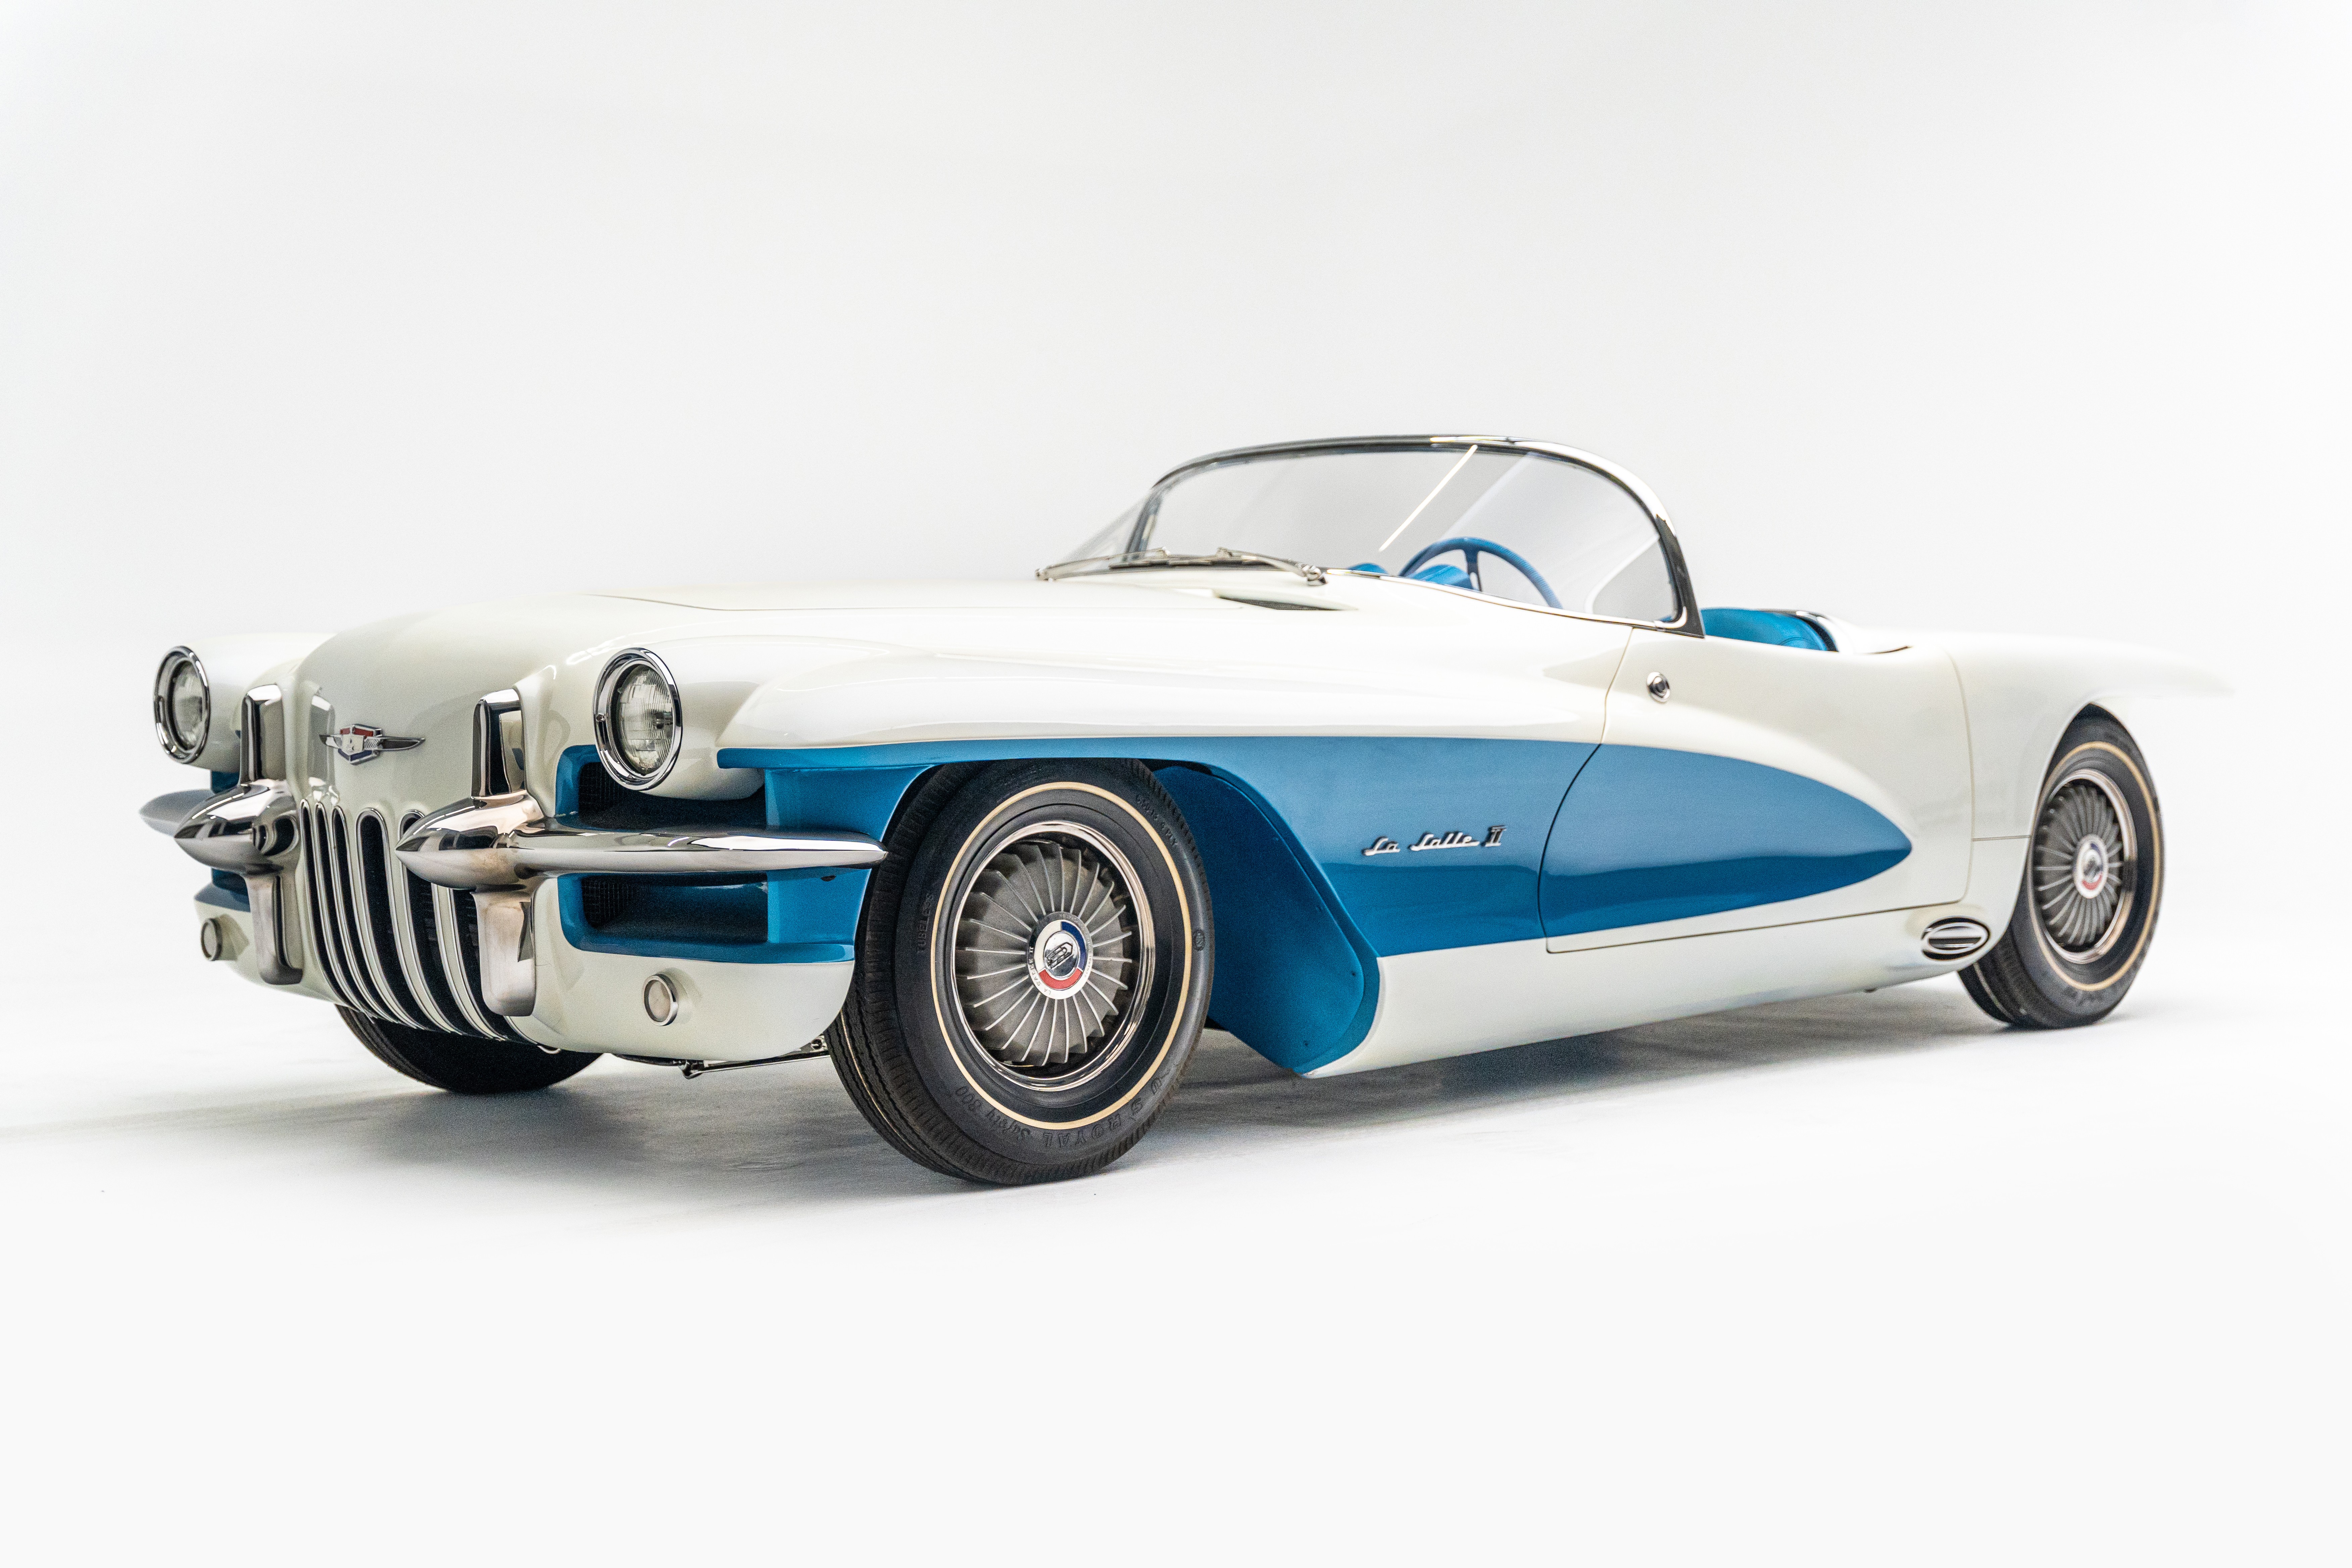 Concept Cars of the 1950s Arrive at The Petersen Automotive Museum